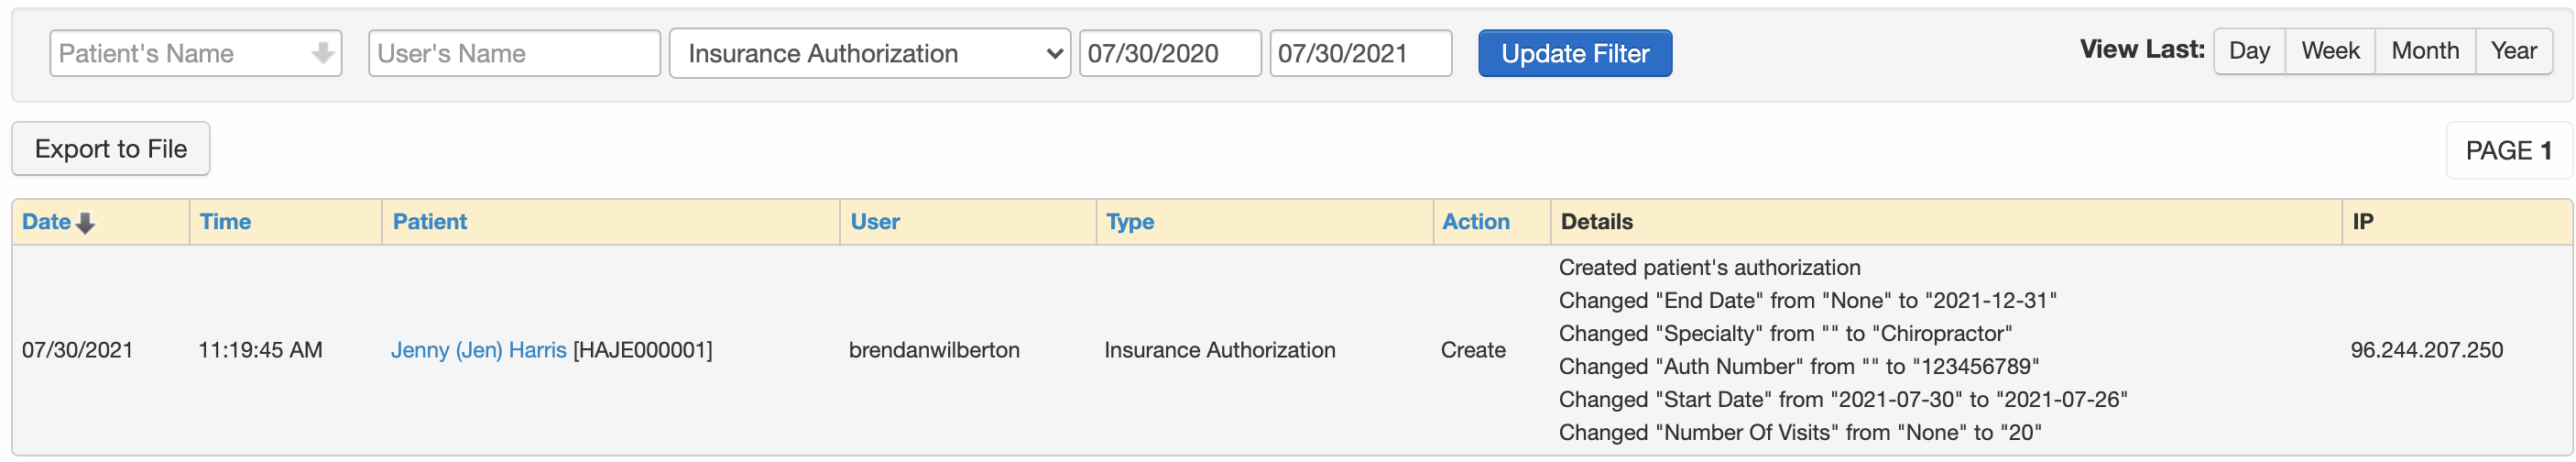 Insurance_Auth_Audit_Log_Example.png